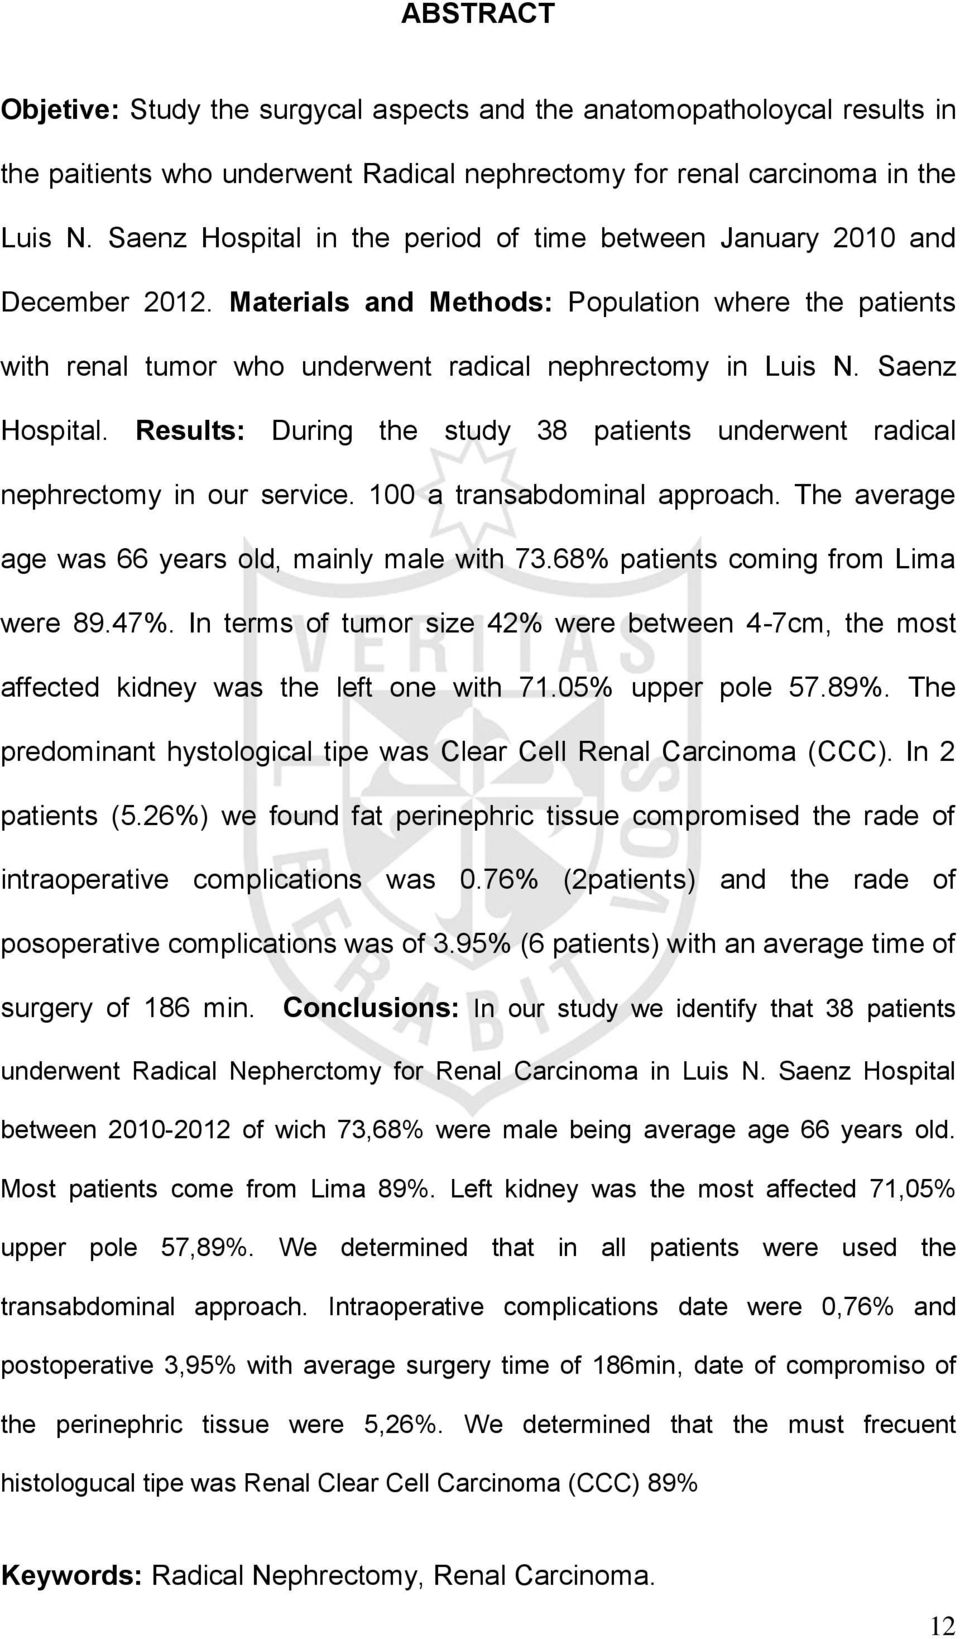 Saenz Hospital. Results: During the study 38 patients underwent radical nephrectomy in our service. 100 a transabdominal approach. The average age was 66 years old, mainly male with 73.